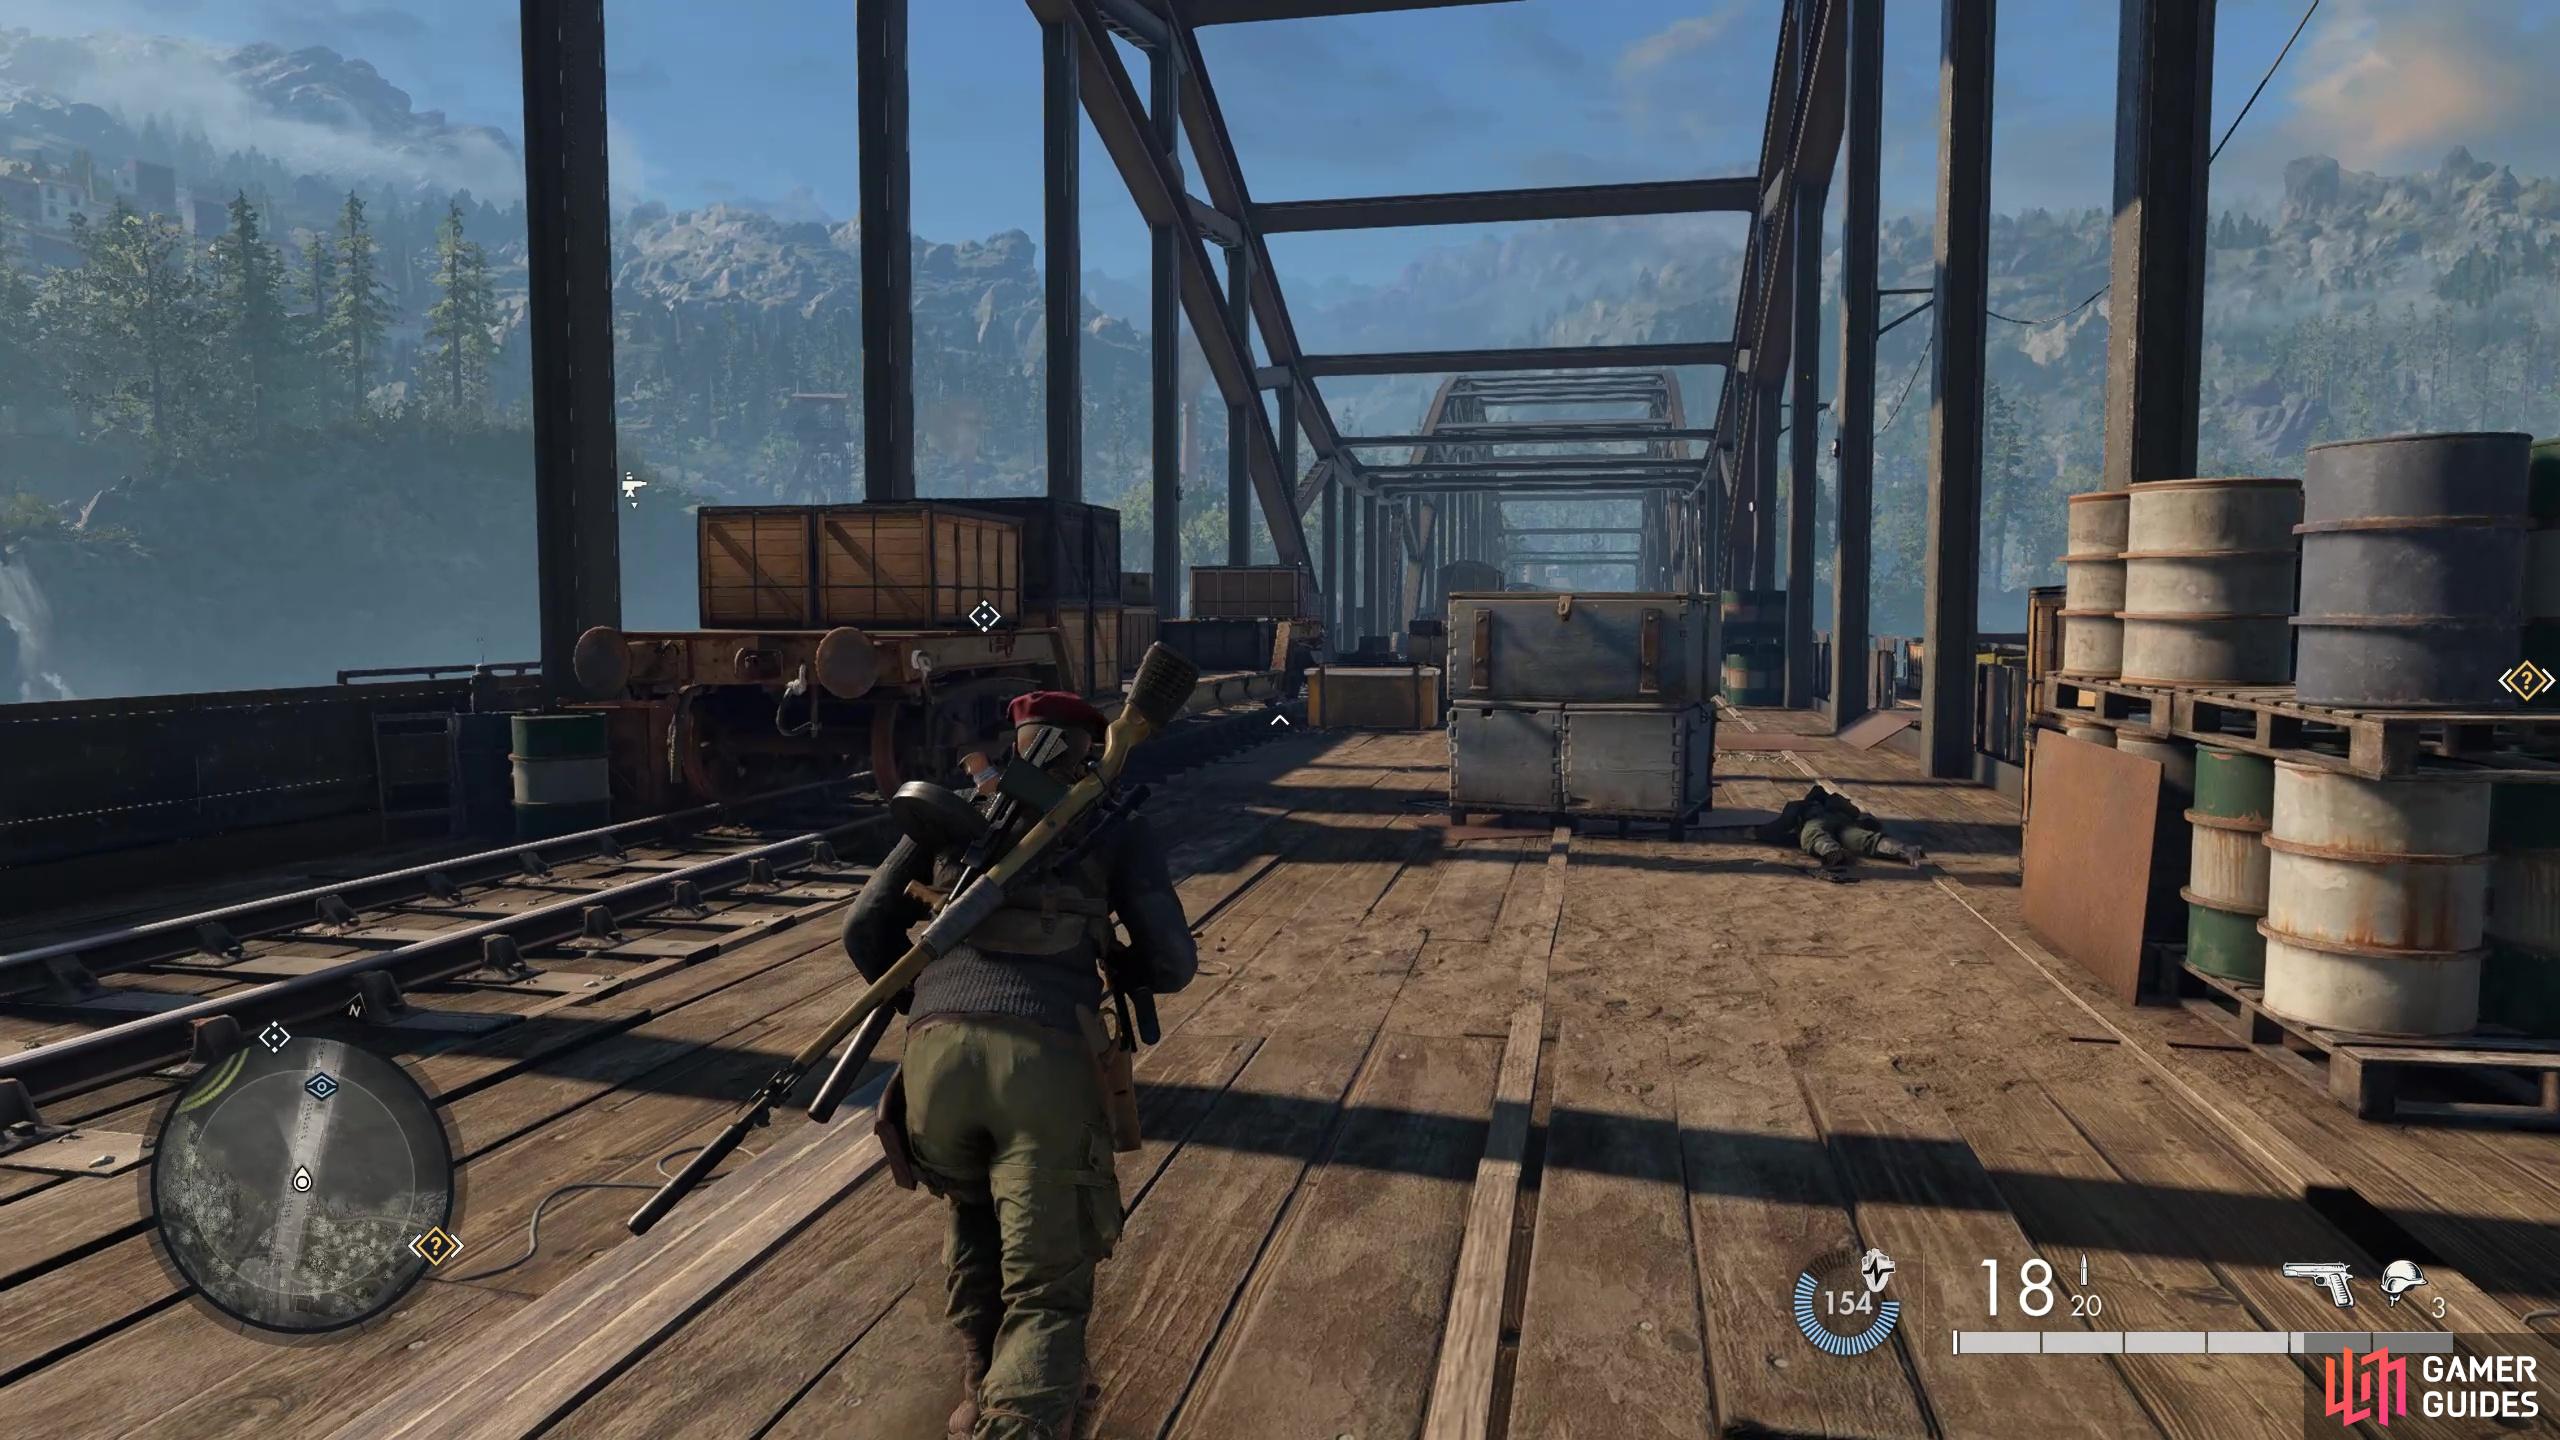 Running across the railway bridge is the most direct route to the next workbench from the abandoned cabin.